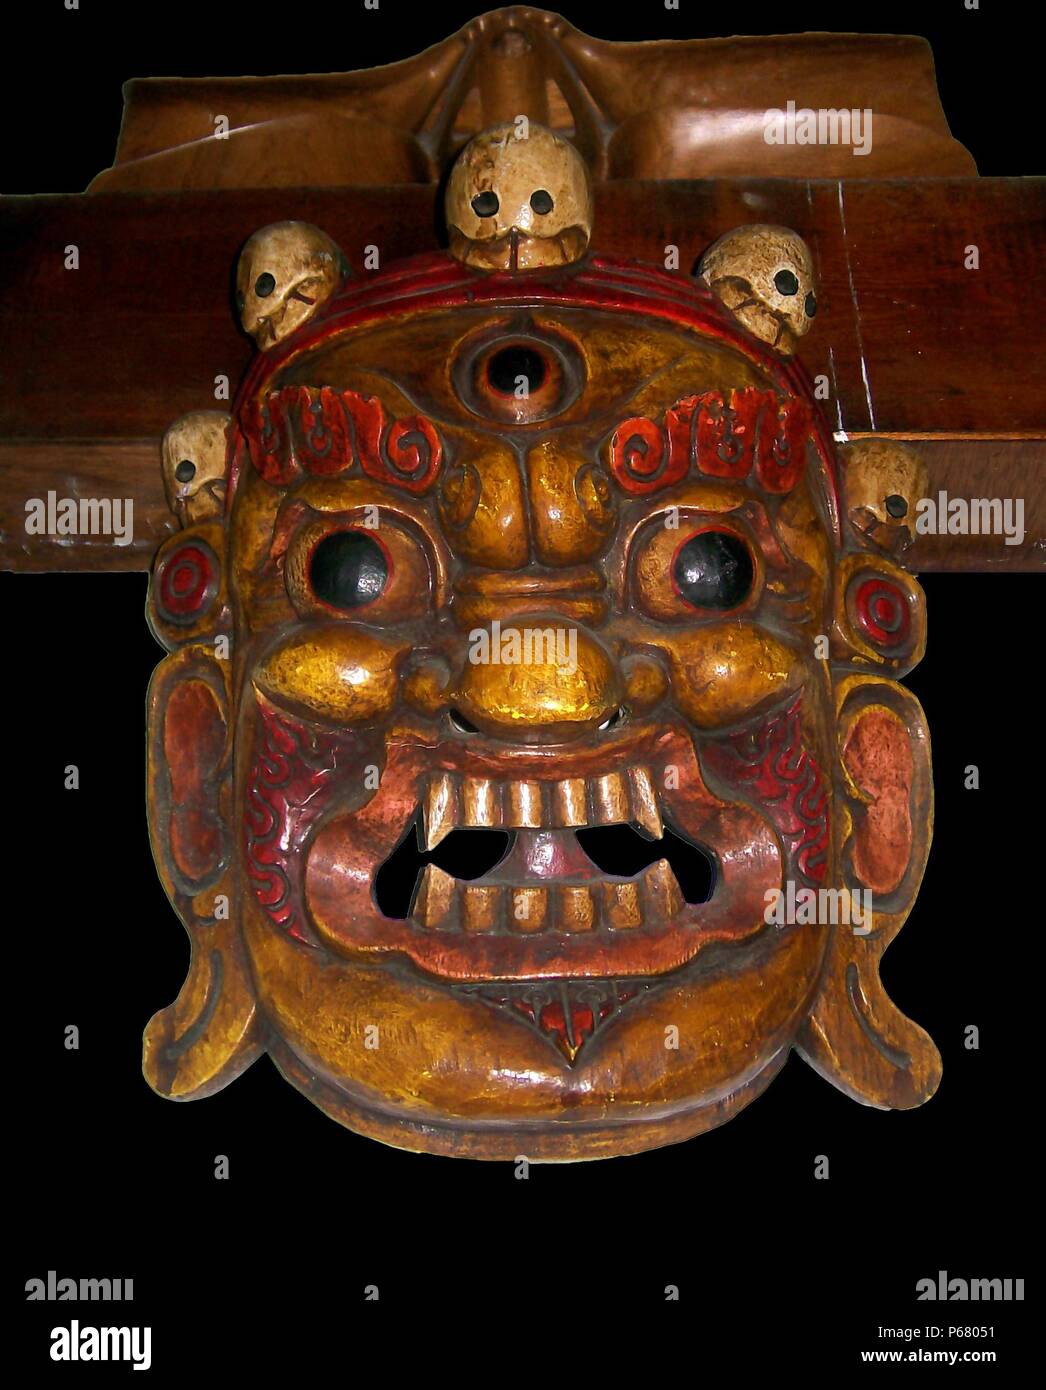 Ancient Tibet: Mahakala Mask, Late Qing Dynasty; 1800 - 1912 AD, from Lhasa, Tibet. A protective deity wth a crown of five skulls, the five wisdoms. Painted wood. Third eye on forehead. Stock Photo